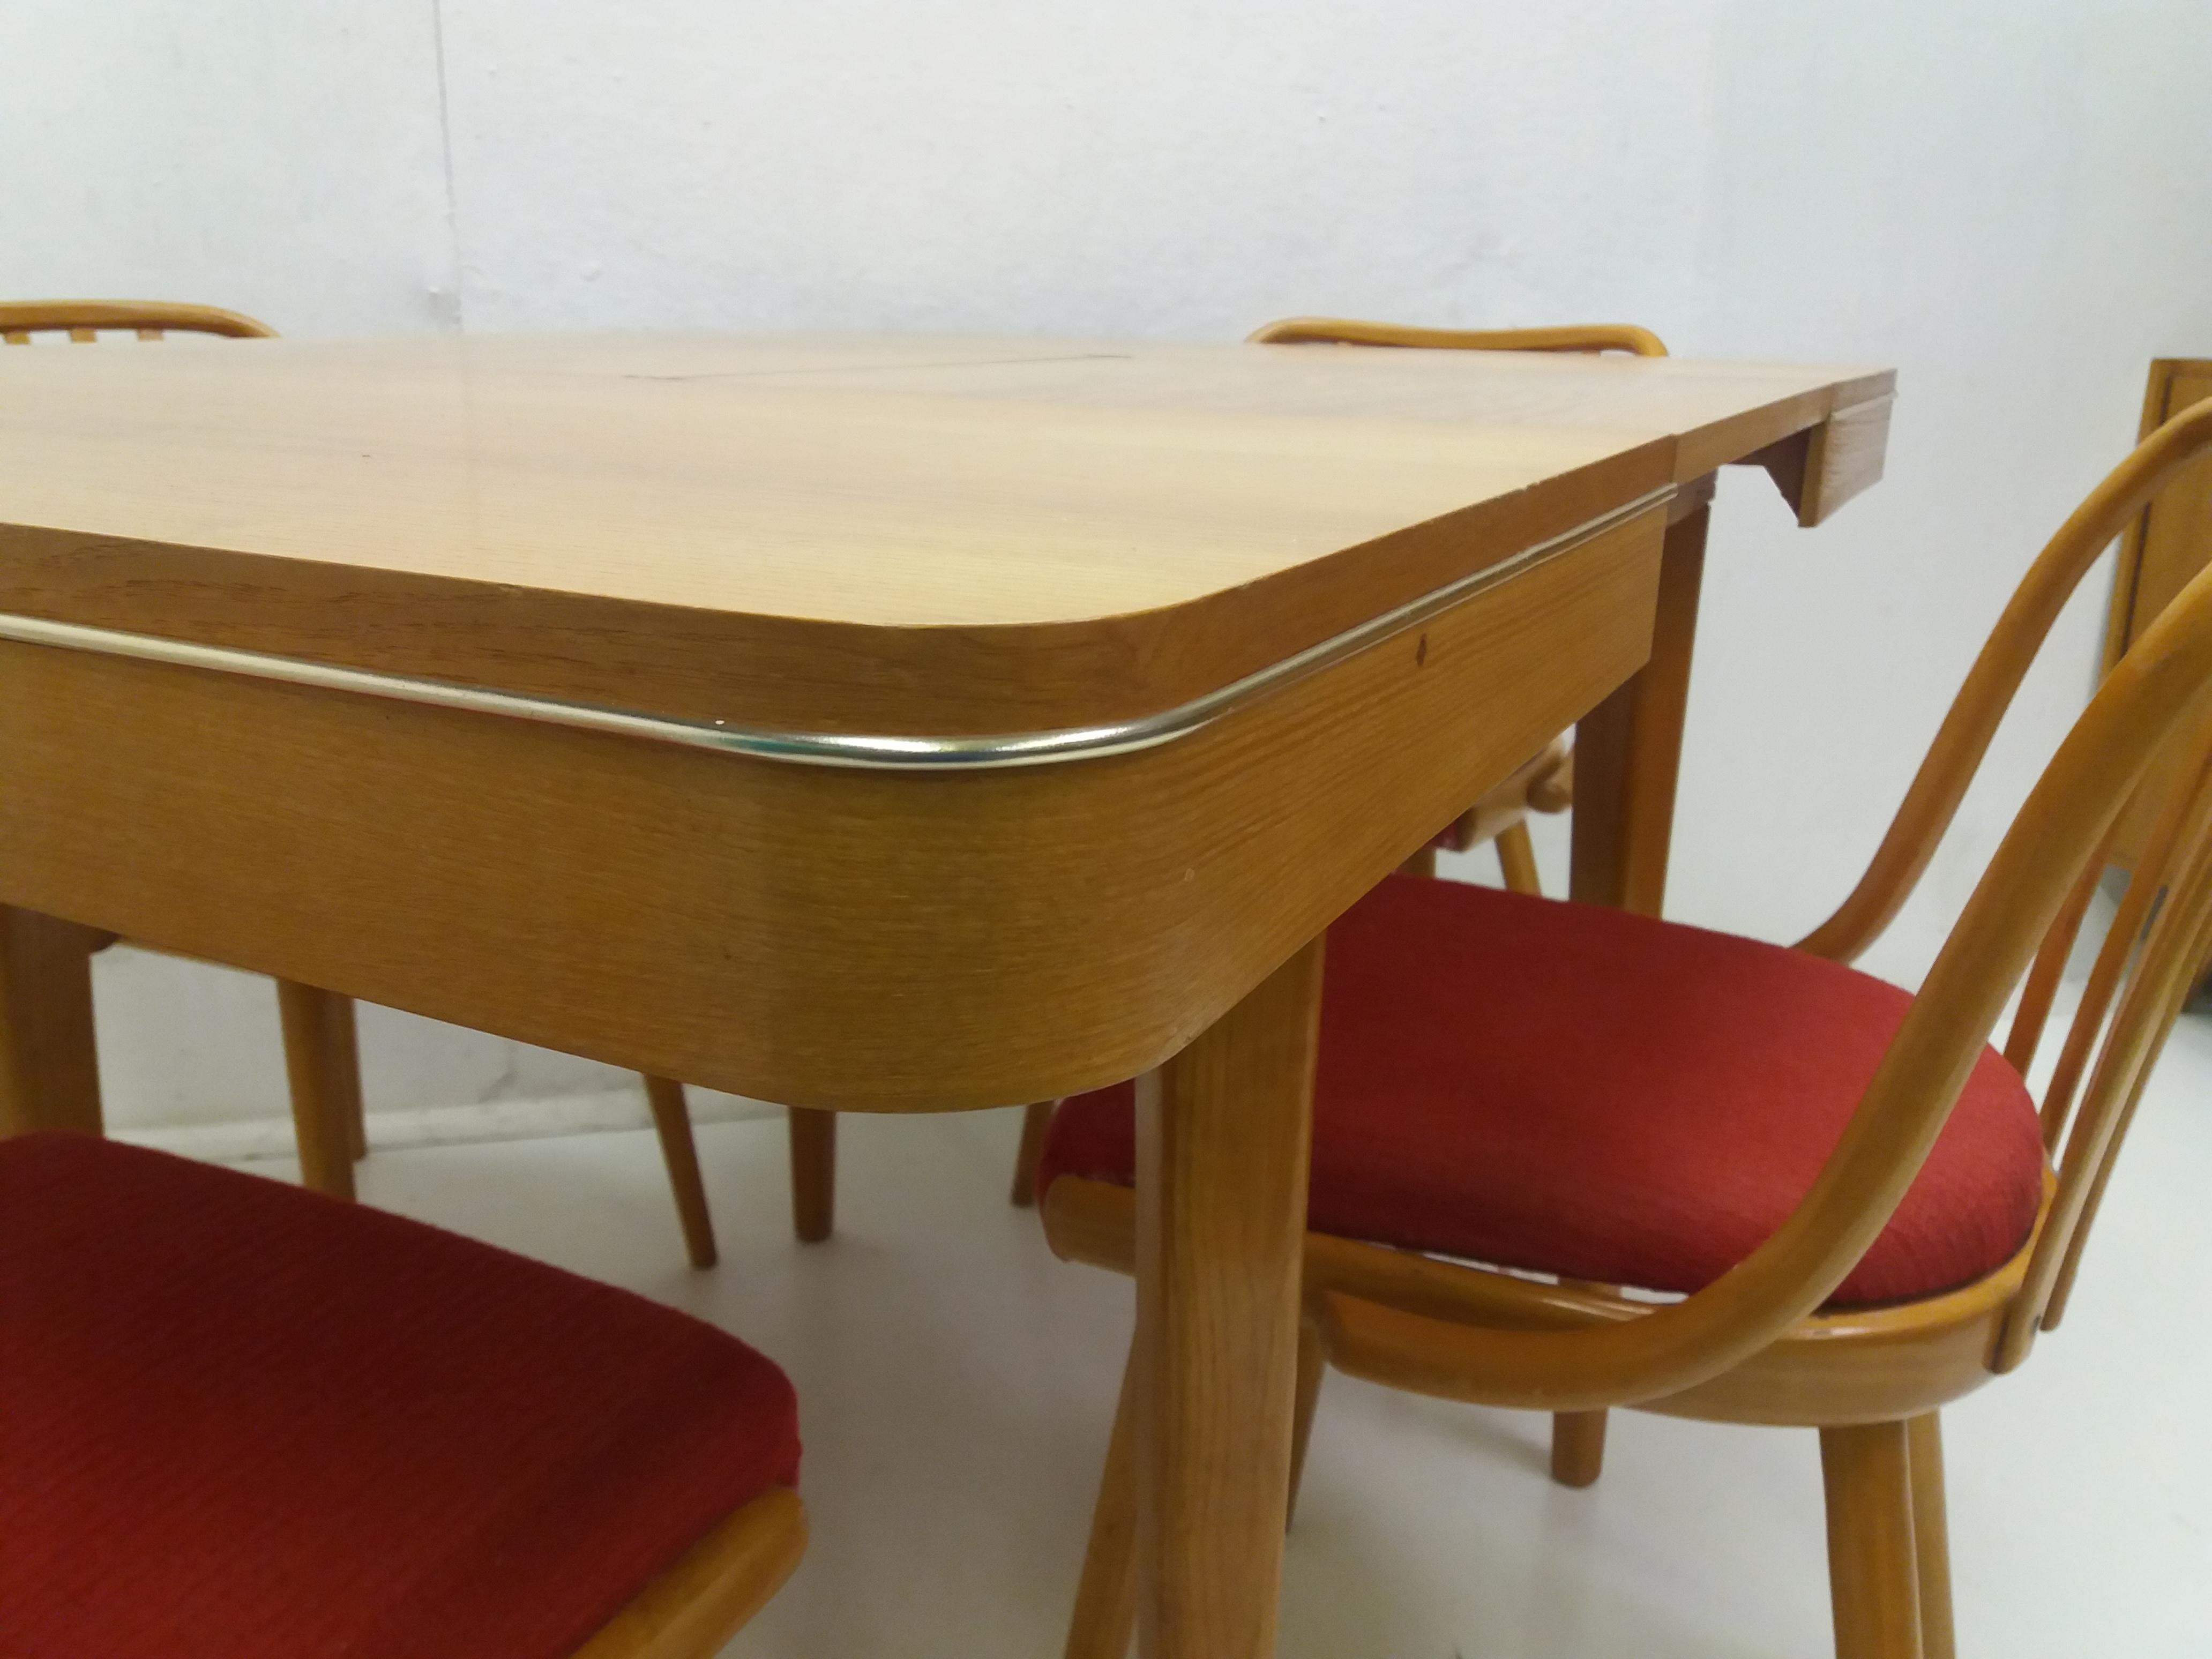 1960 Set of 4 Retro Suman Chairs and Table, Czechoslovakia In Good Condition For Sale In Praha, CZ